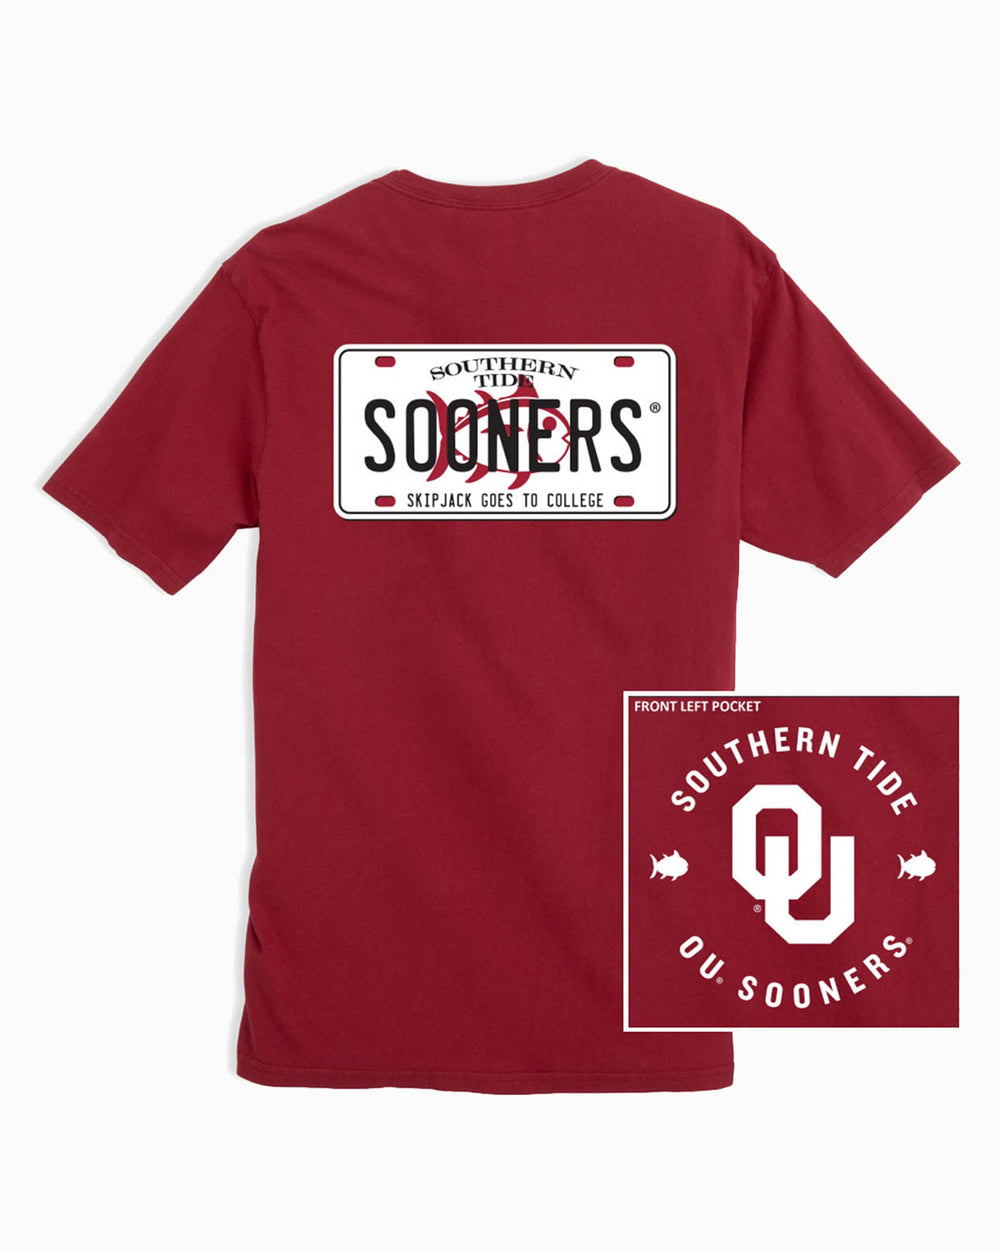 The front and back of the Oklahoma Sooners License Plate T-Shirt by Southern Tide - Crimson